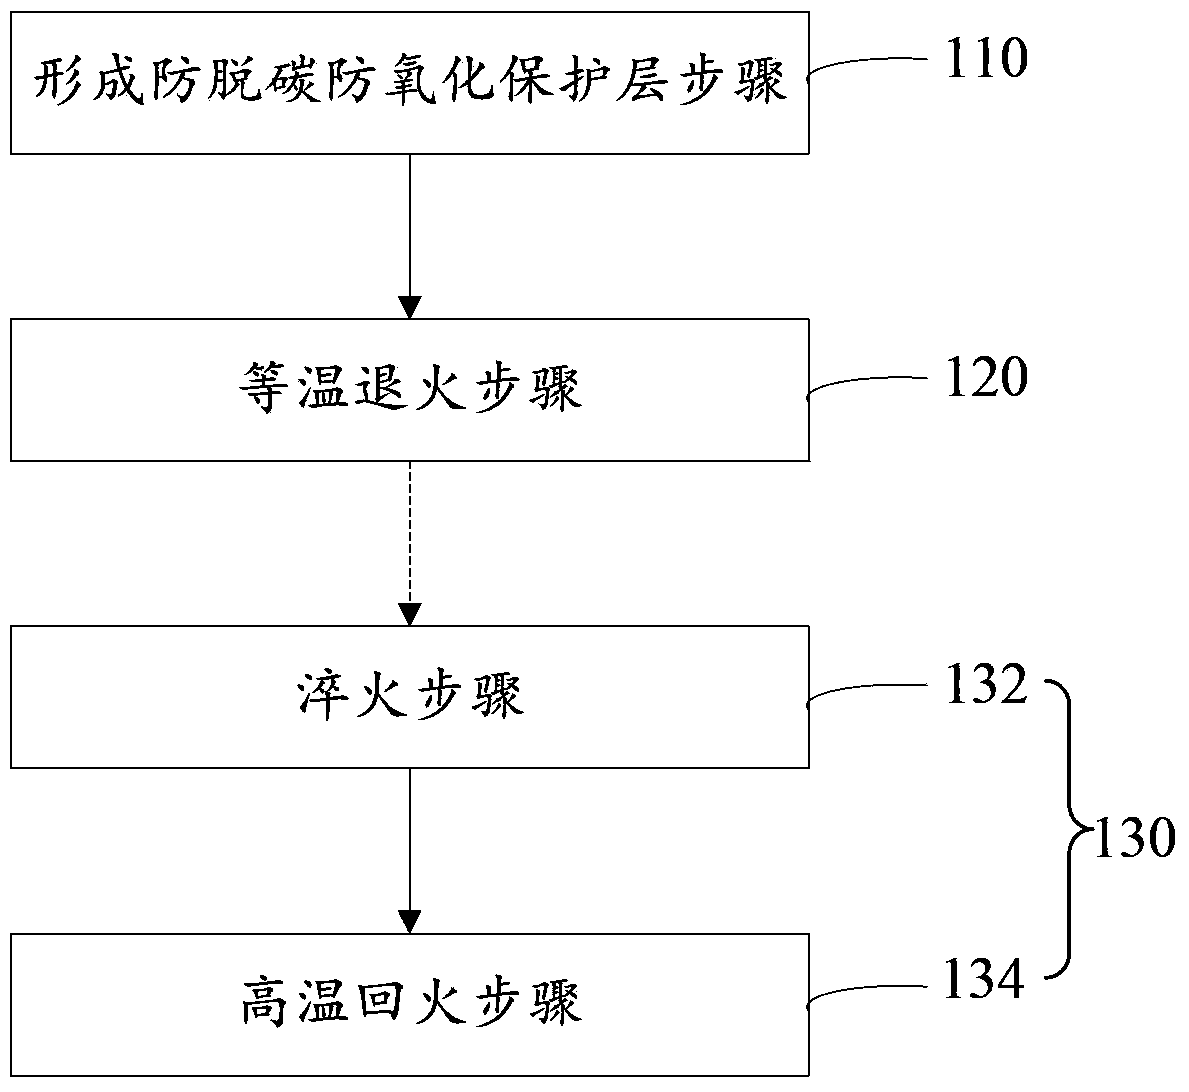 Heat treatment method of alloy steel after forging